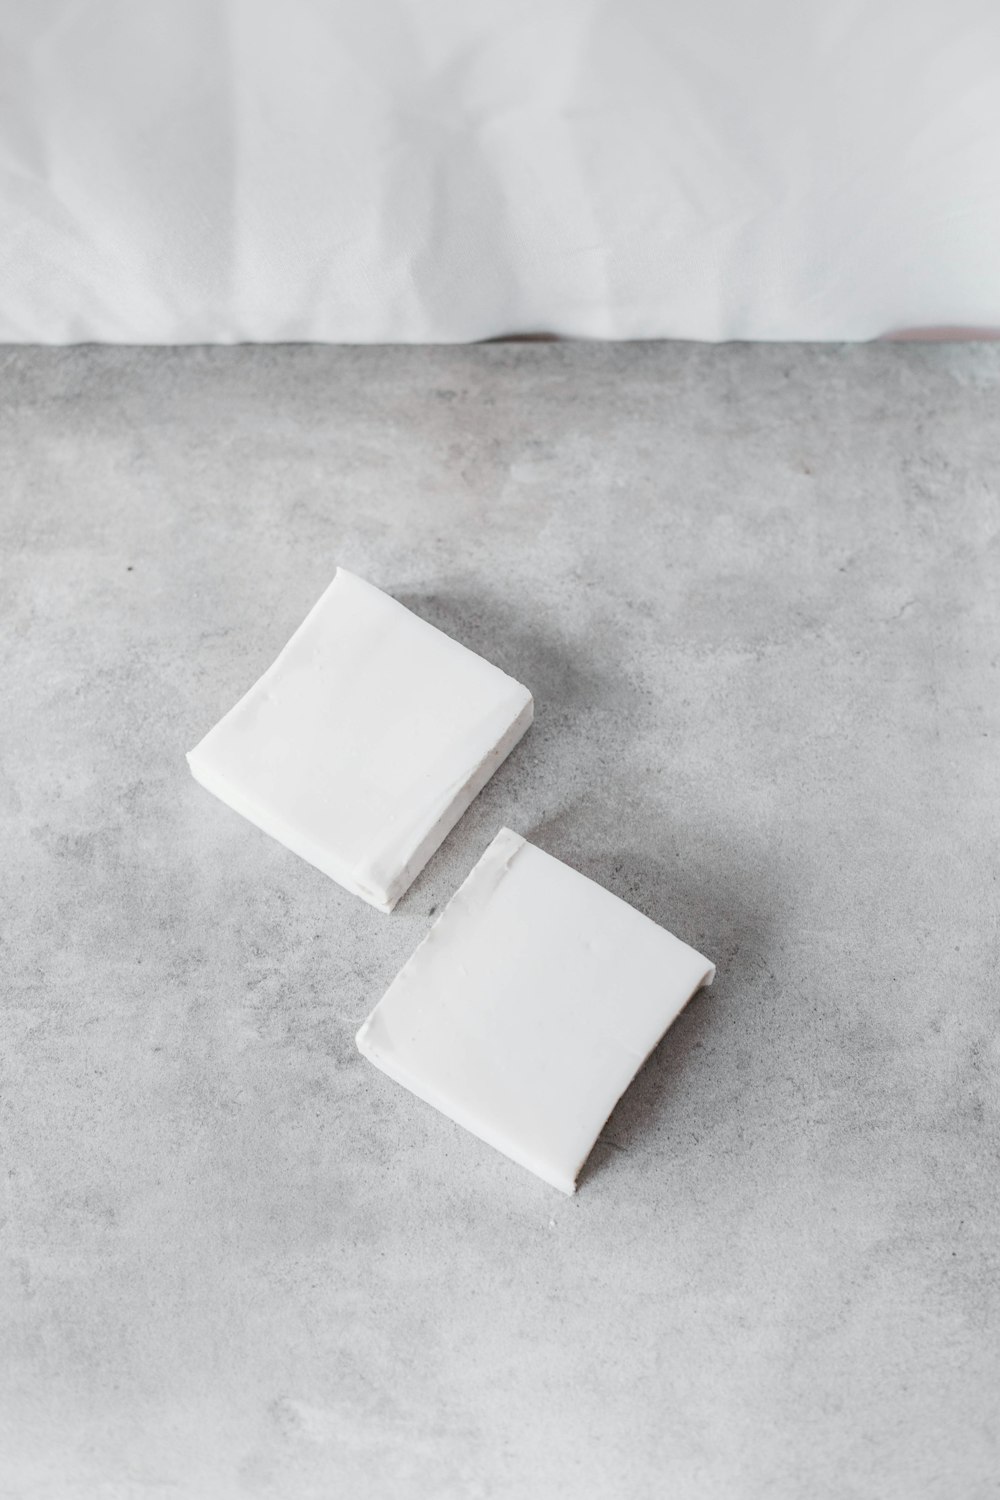 a couple of white square objects sitting on top of a cement floor